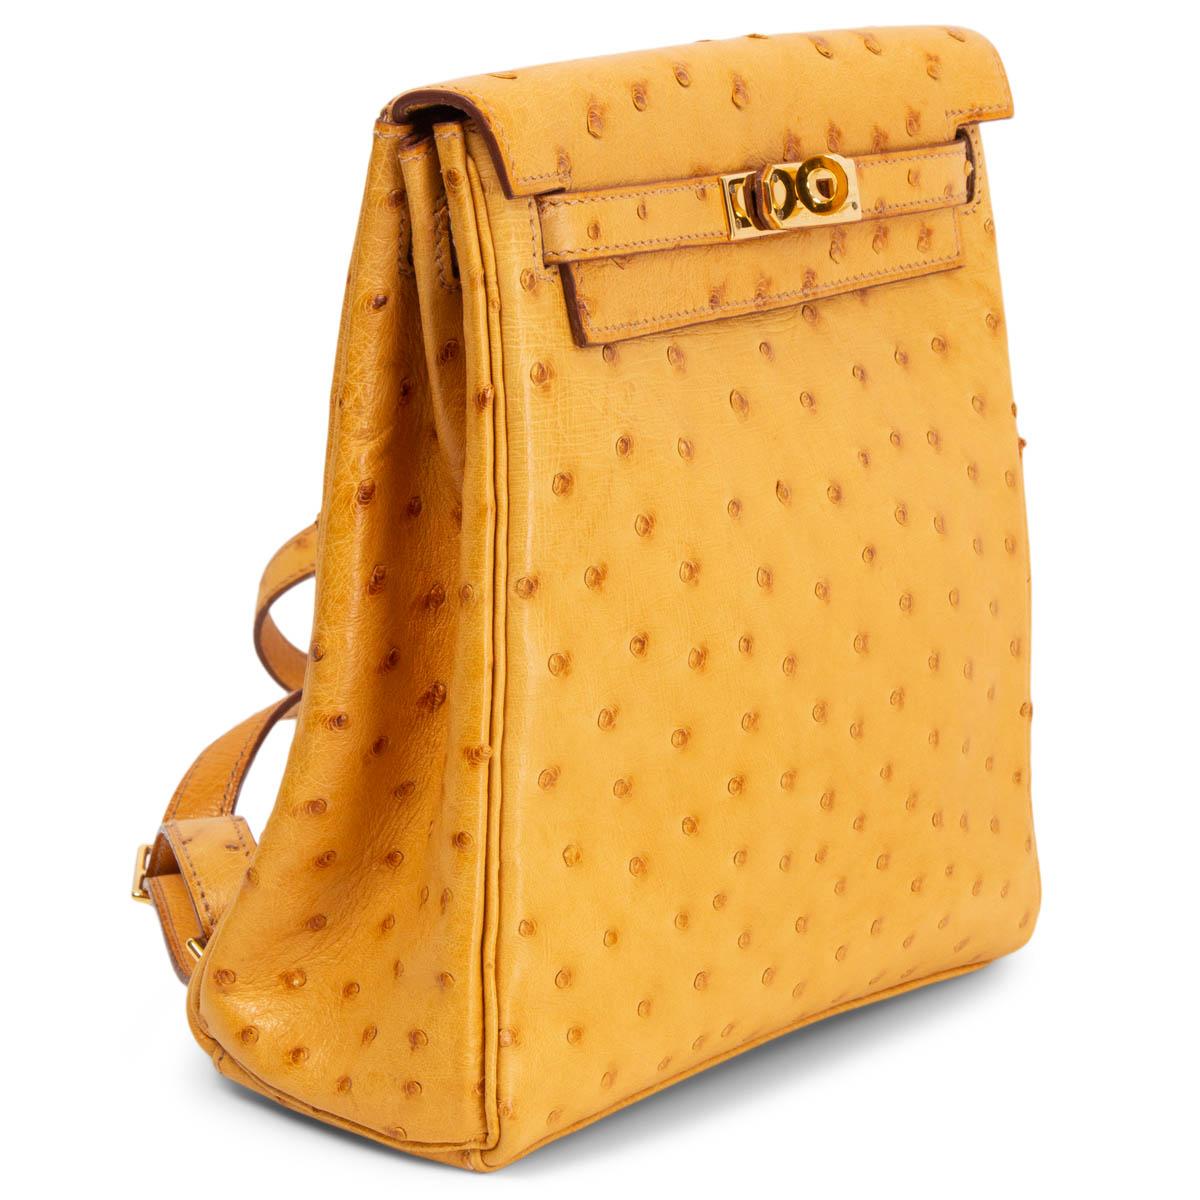 100% authentic Hermès Kelly A Dos backpack in Saffron ostrich leather featuring gold-tone hardware and classic Kelly belt-style closure. Has two adjustable backpack straps and is lined in Saffron Chevre leather with one slip pocket against the back.